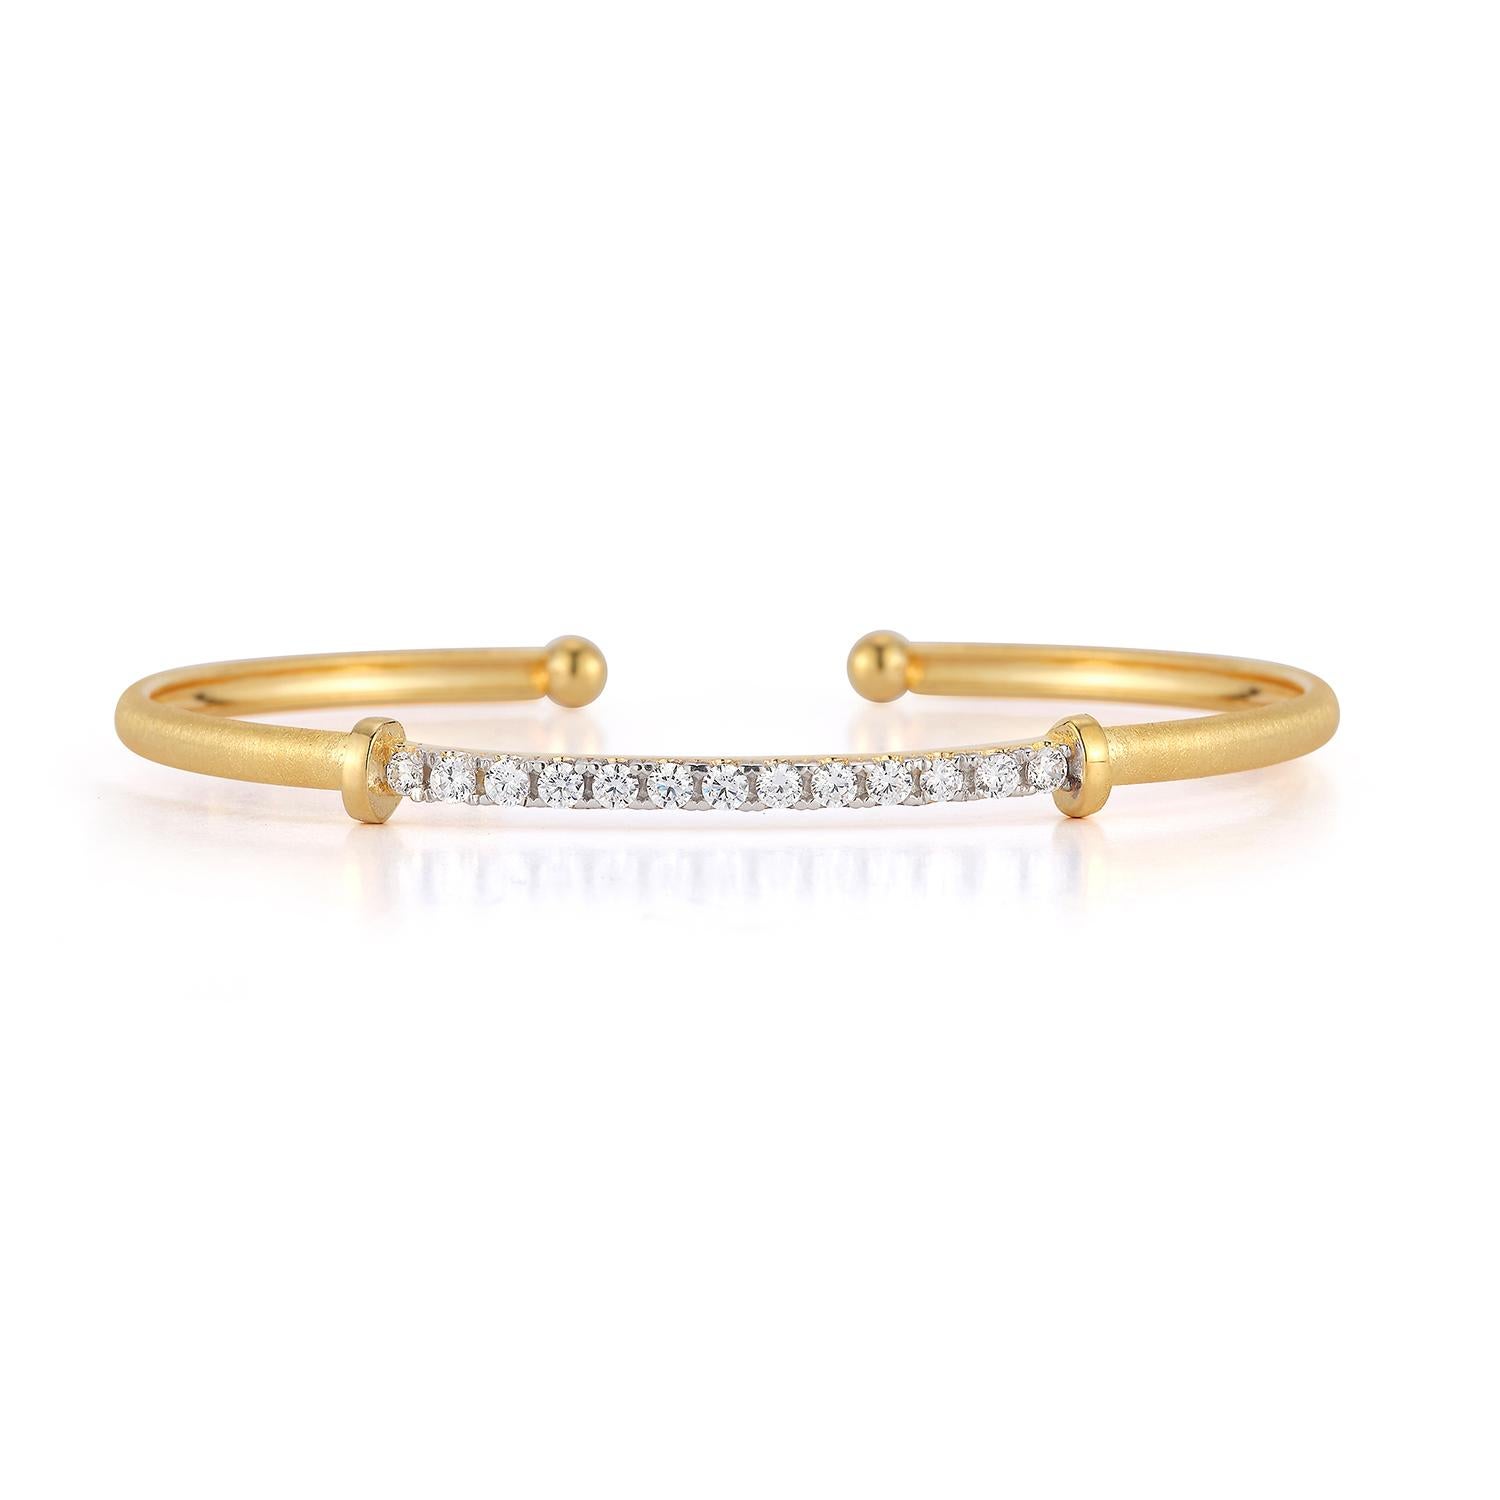 14 Karat Yellow Gold Hand-Crafted Matte-Finished Flexible Bangle Bracelet, Accented with 0.50 Carats of Pave Set Diamonds.
